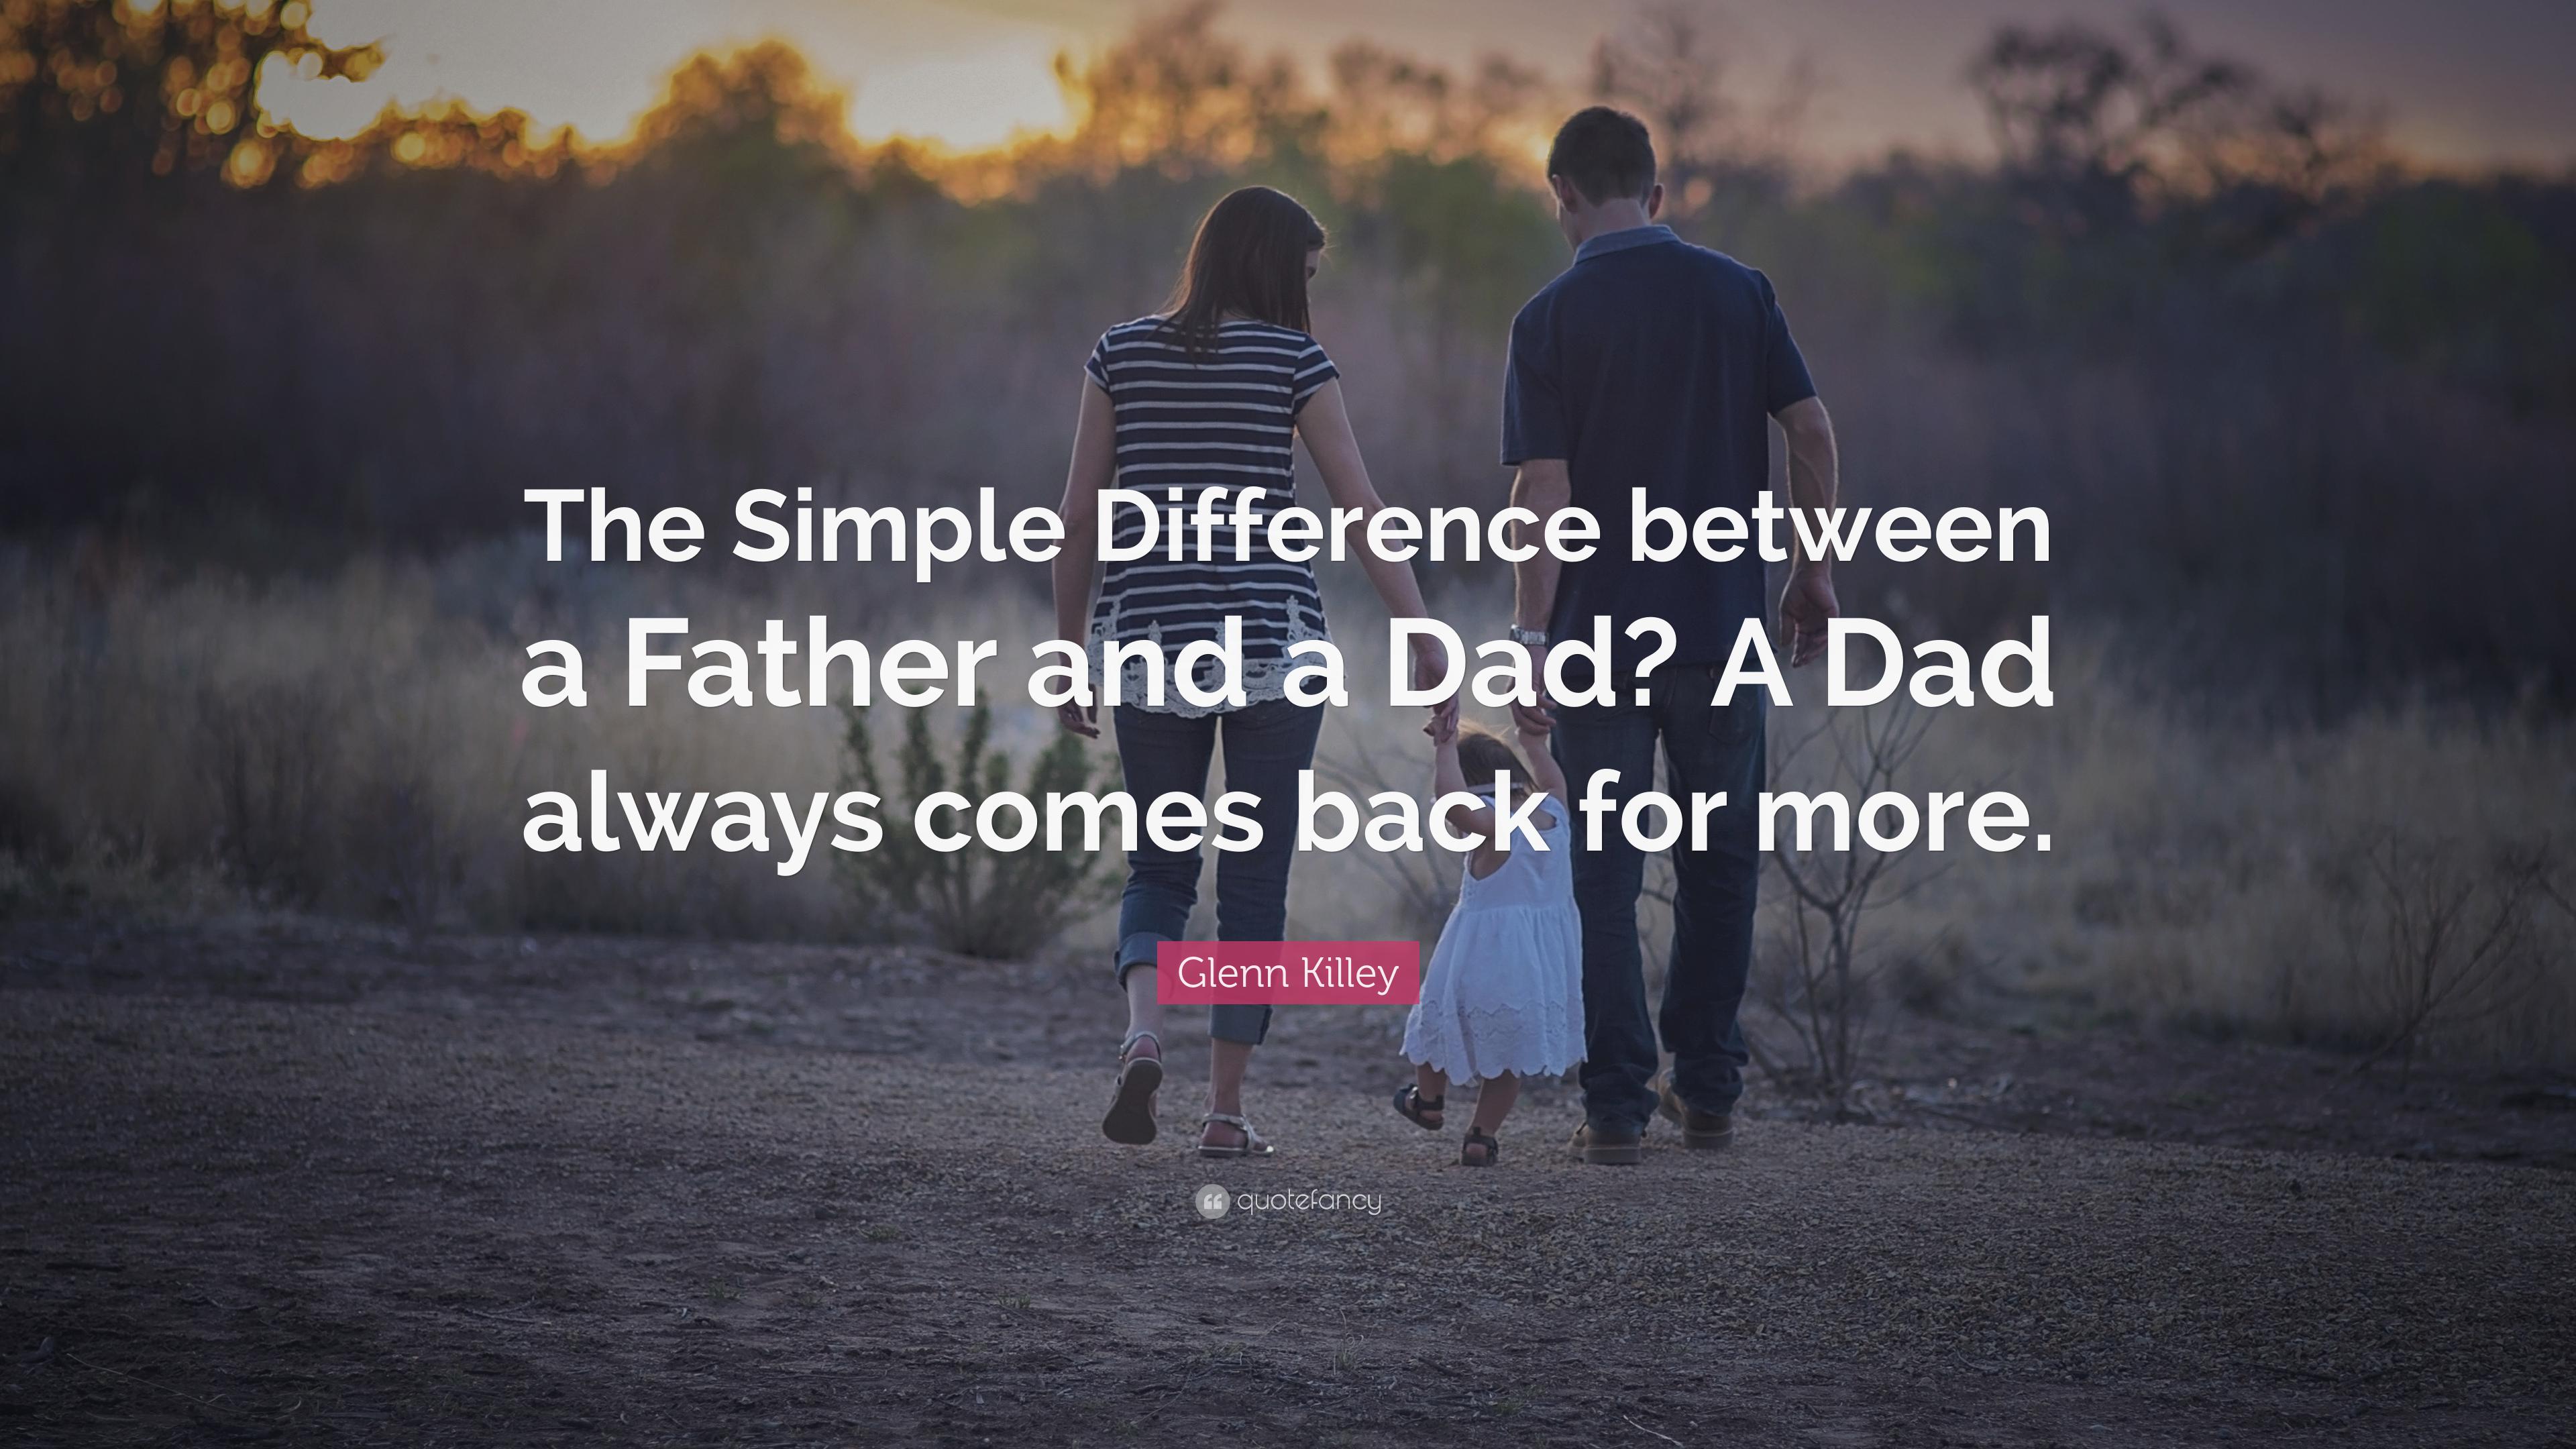 Glenn Killey Quote: “The Simple Difference between a Father and a